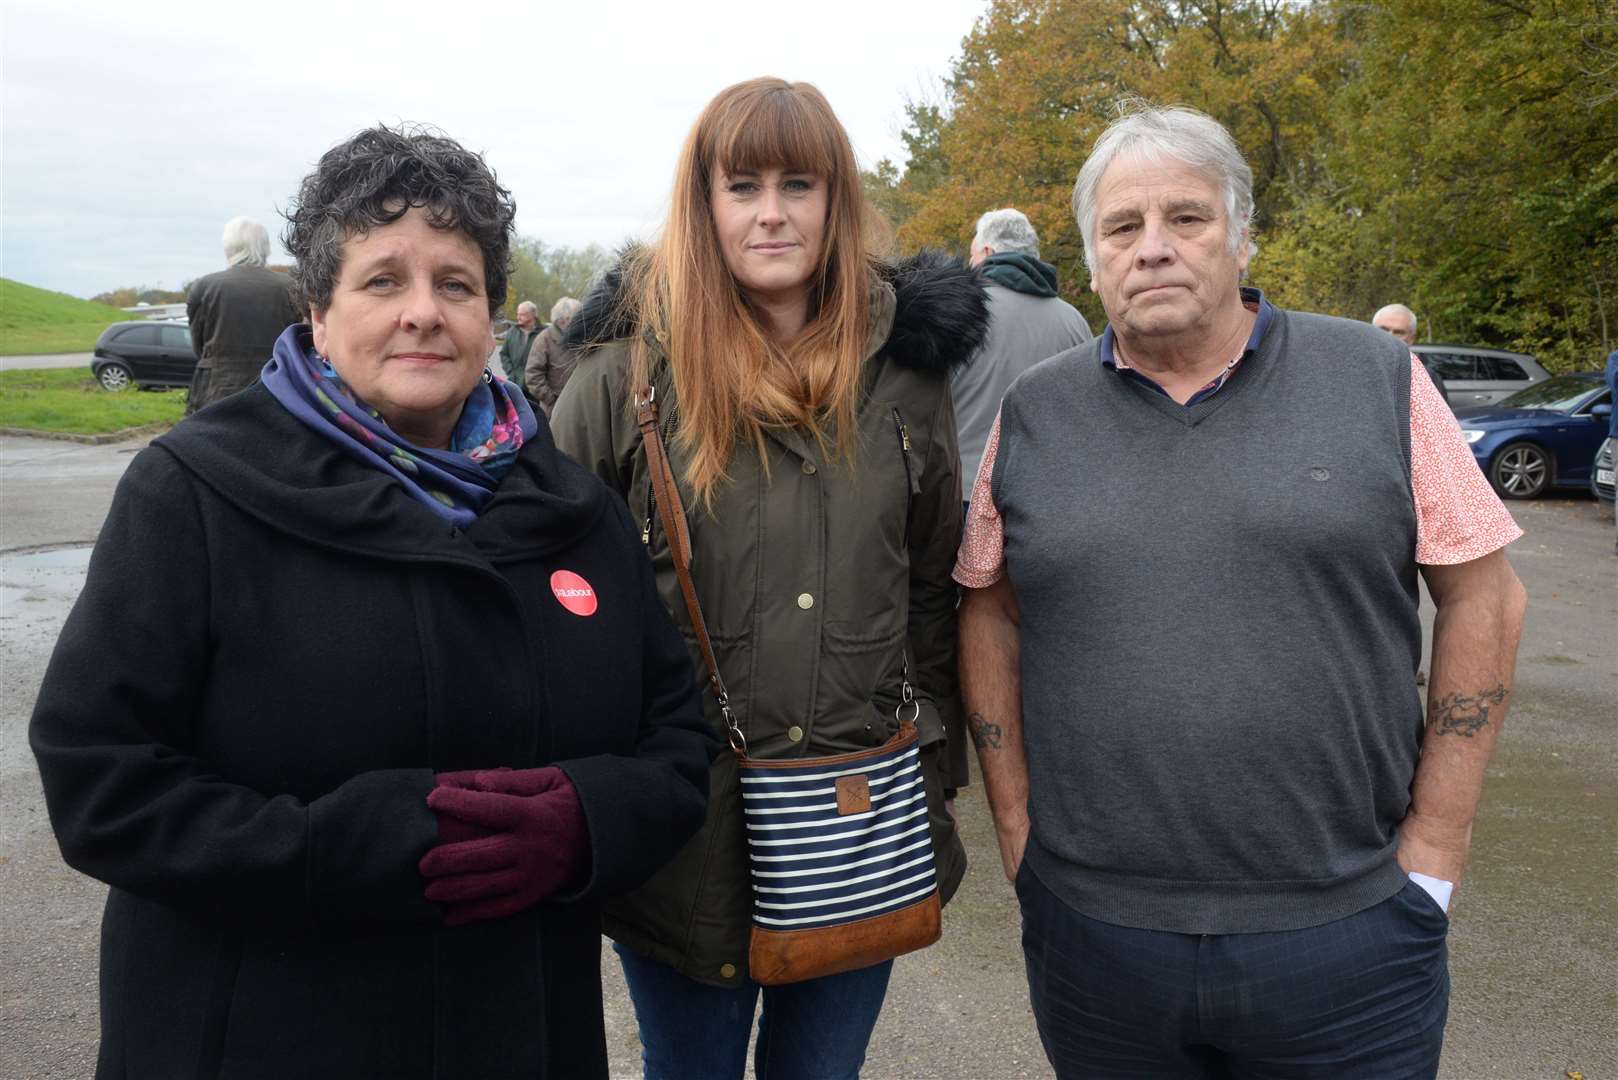 Cllr Teresa Murray, Kelly Tolhurst MP and Cllr Ron Sands spoke at a protest over the Deangate Ridge development in the run up to the 2019 General Election. Picture: Chris Davey